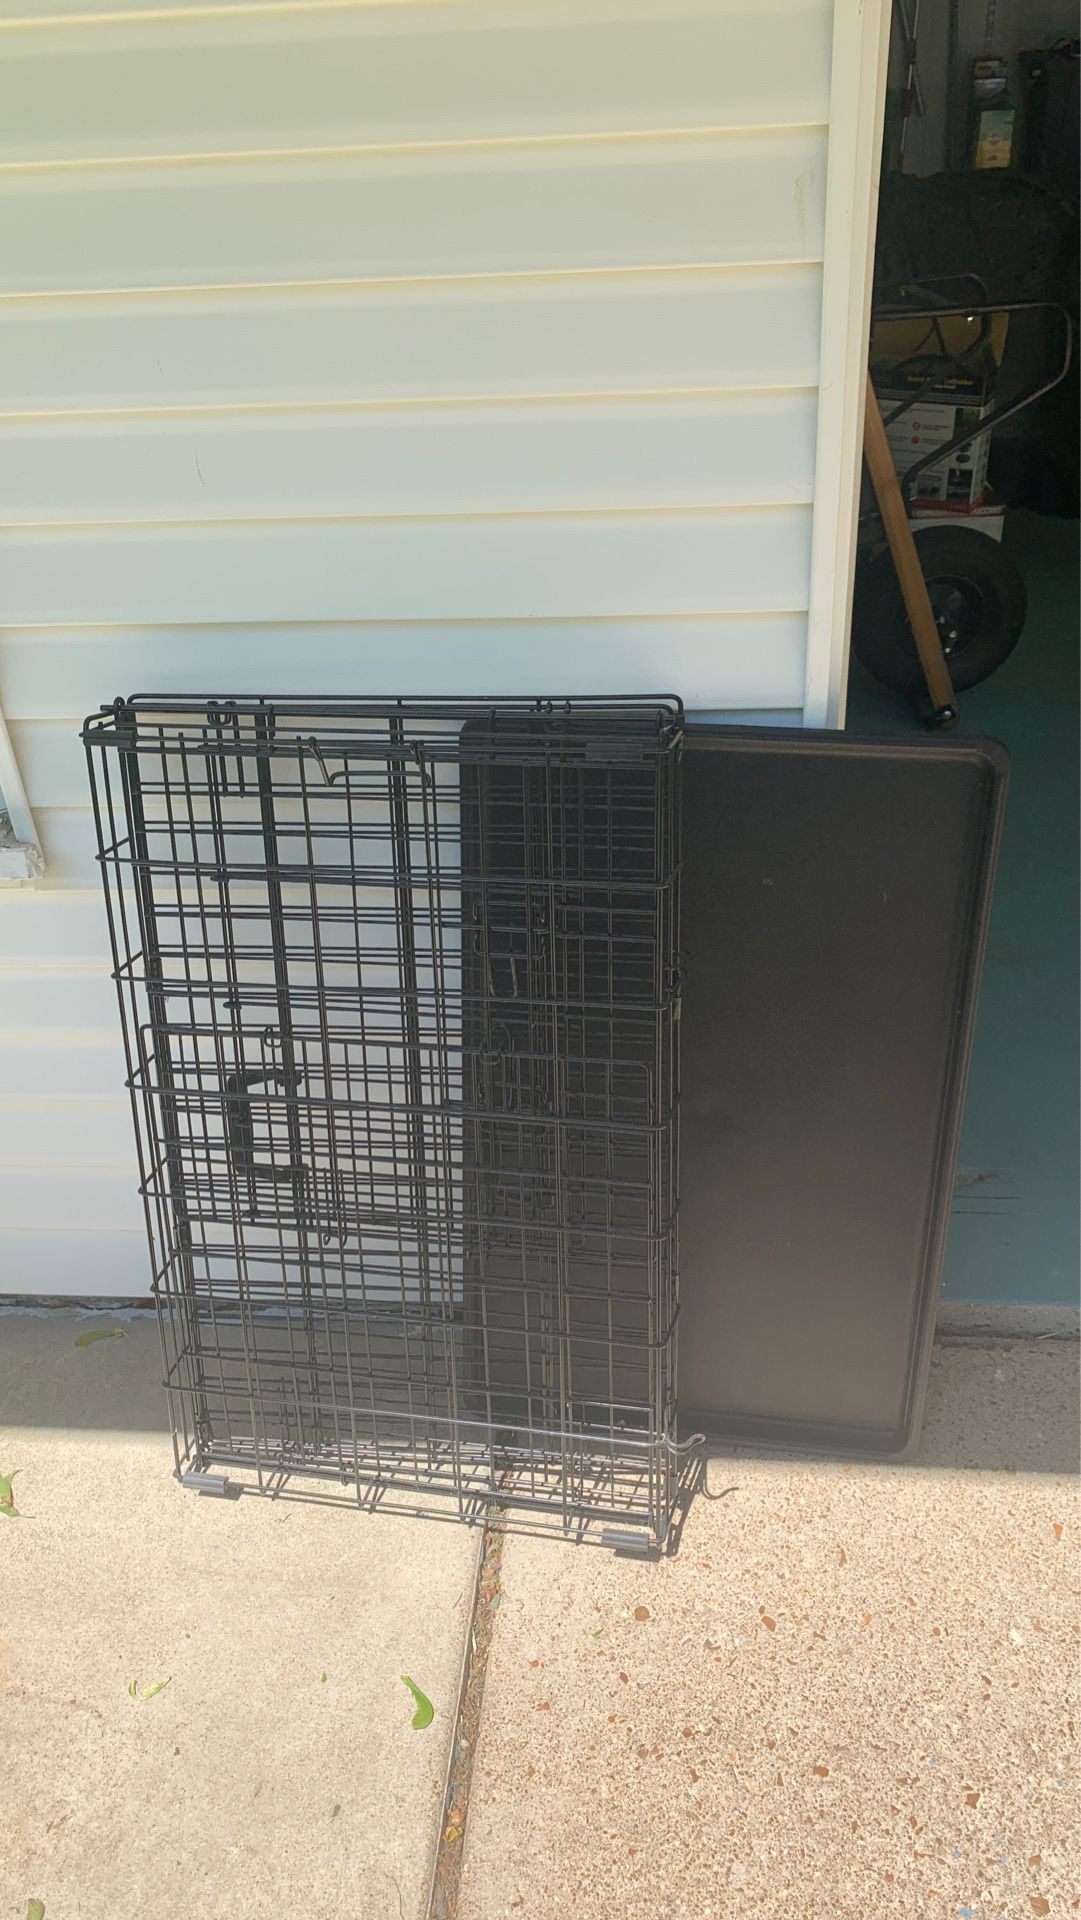 Brand new dog crate! 18x36